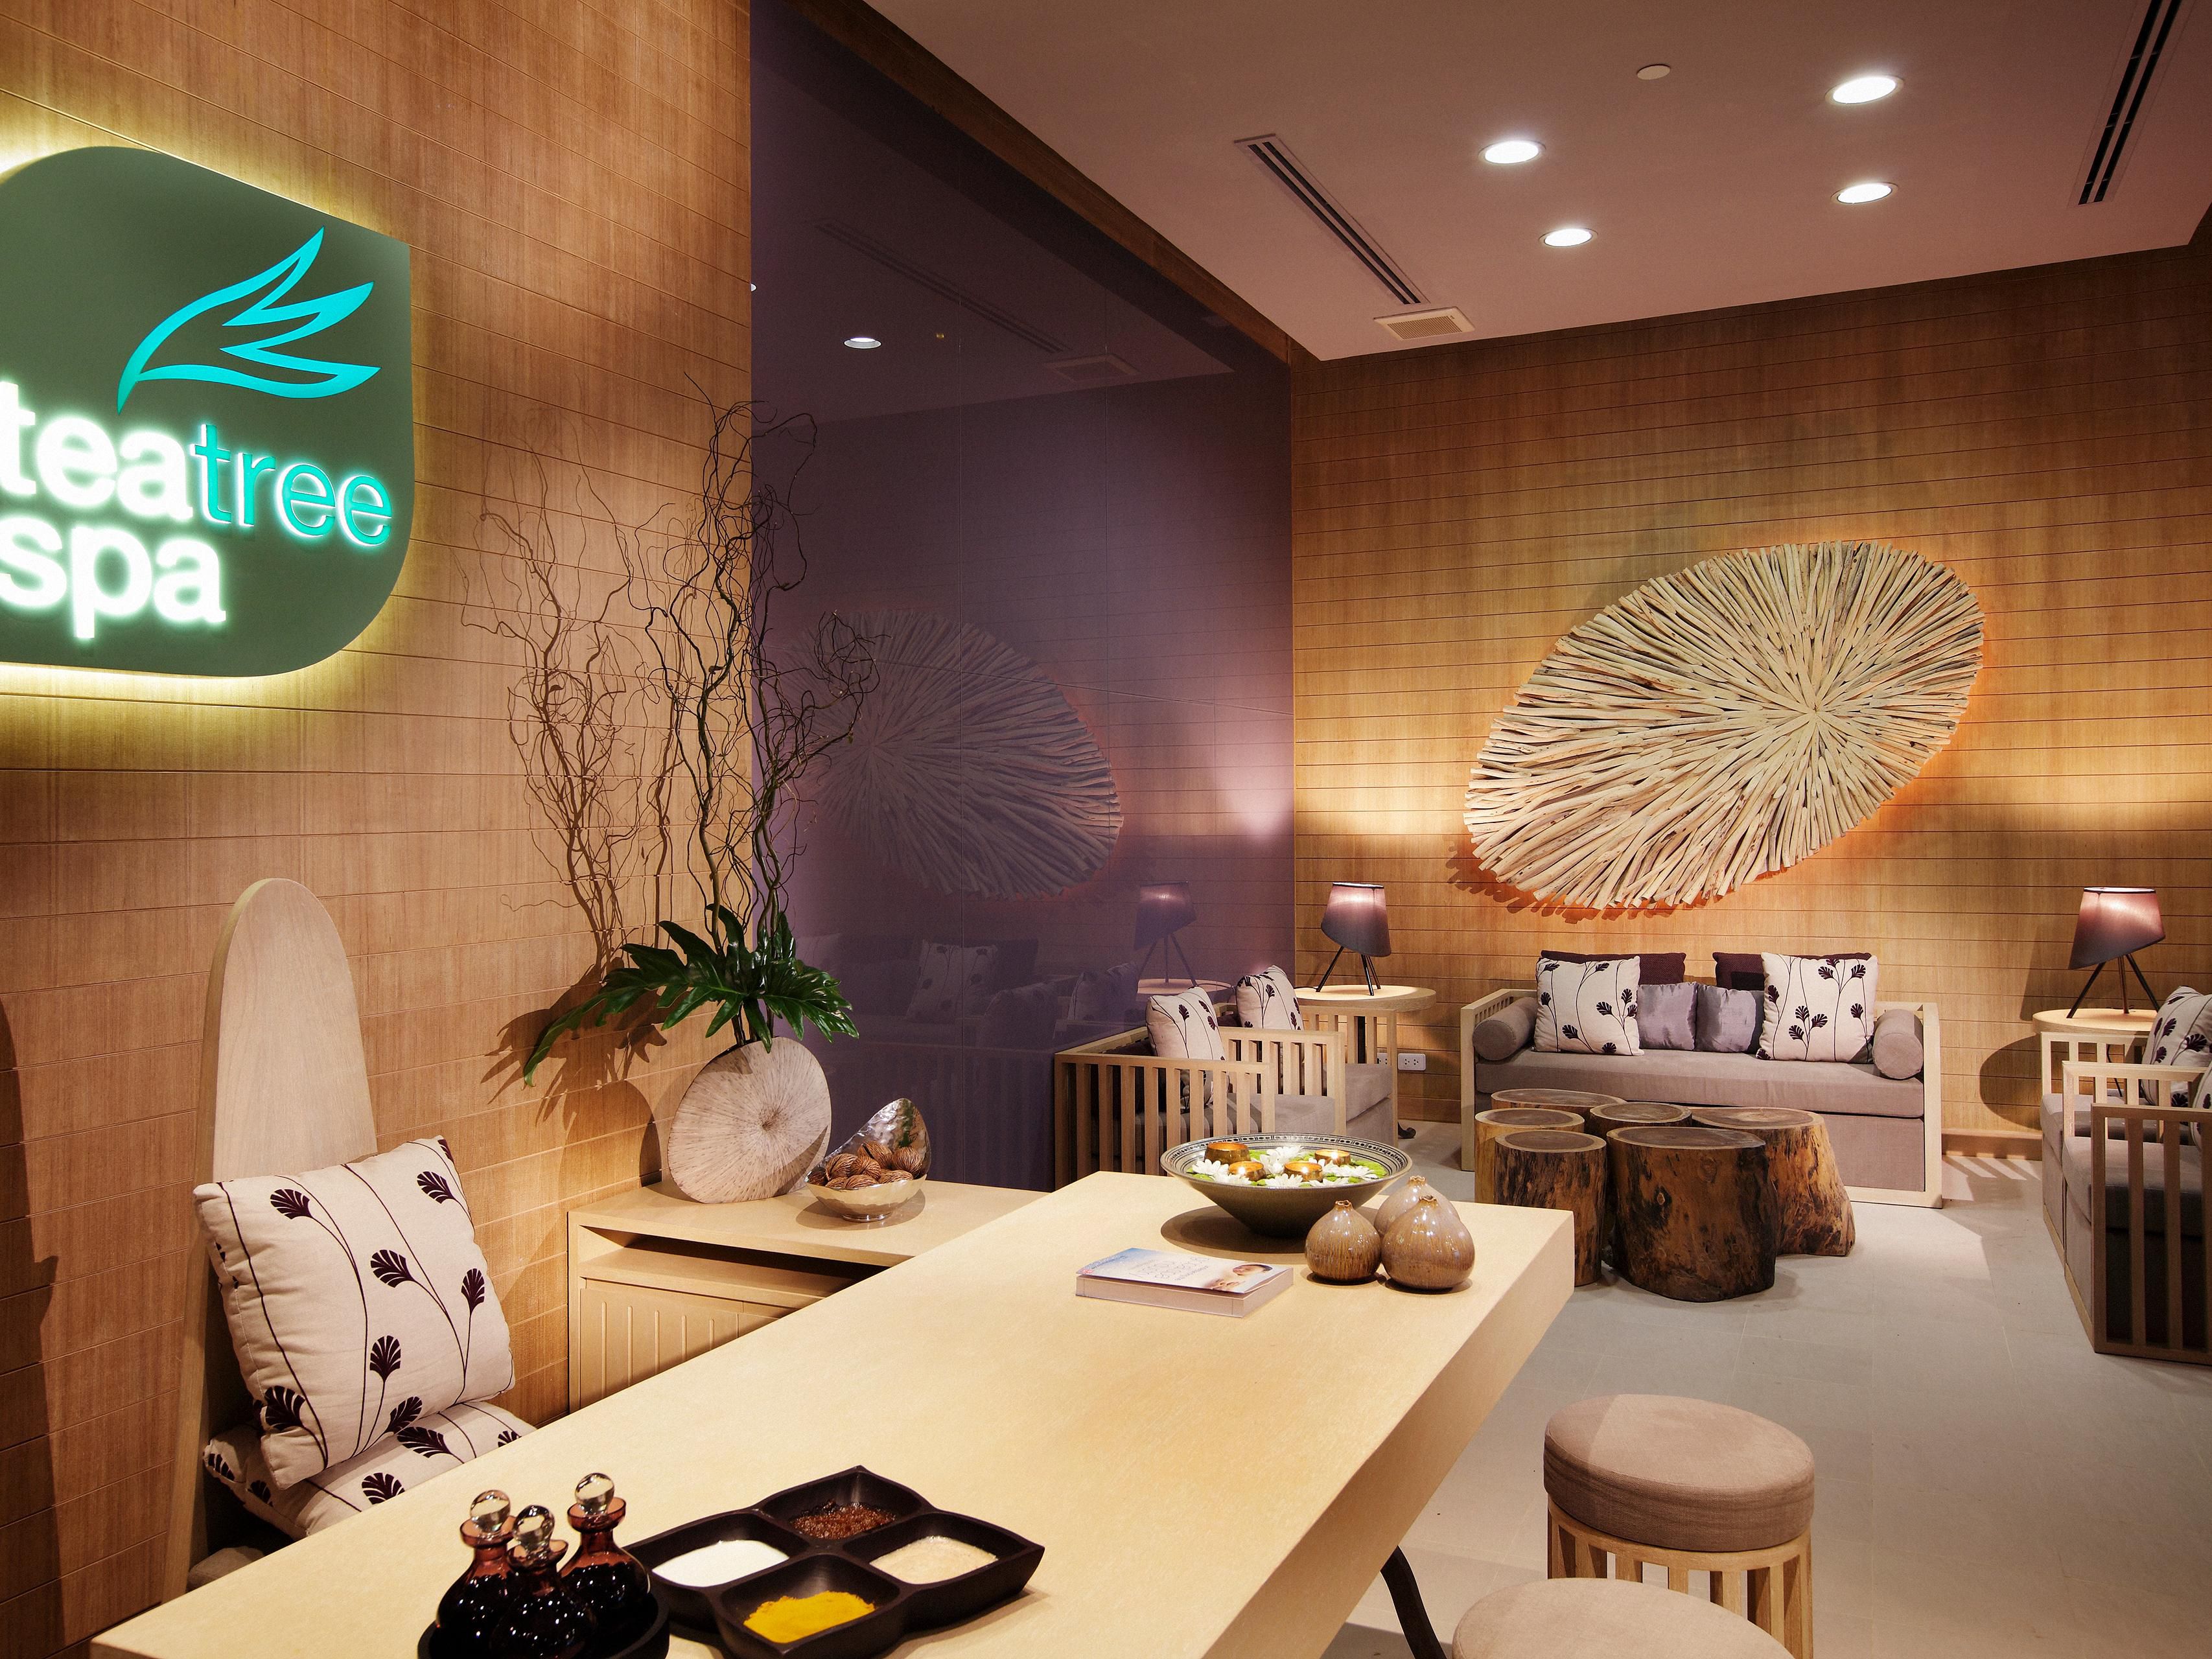 The Tea Tree Spa at Holiday Inn is a calm and refreshing sanctuary where you can relax the body and soothe the soul.

Whether you opt for a massage or to enjoy a full spa experience, our professional therapists will be sure to engage your senses and ensure a positive, uplifting experience as well as a renewal of energy.